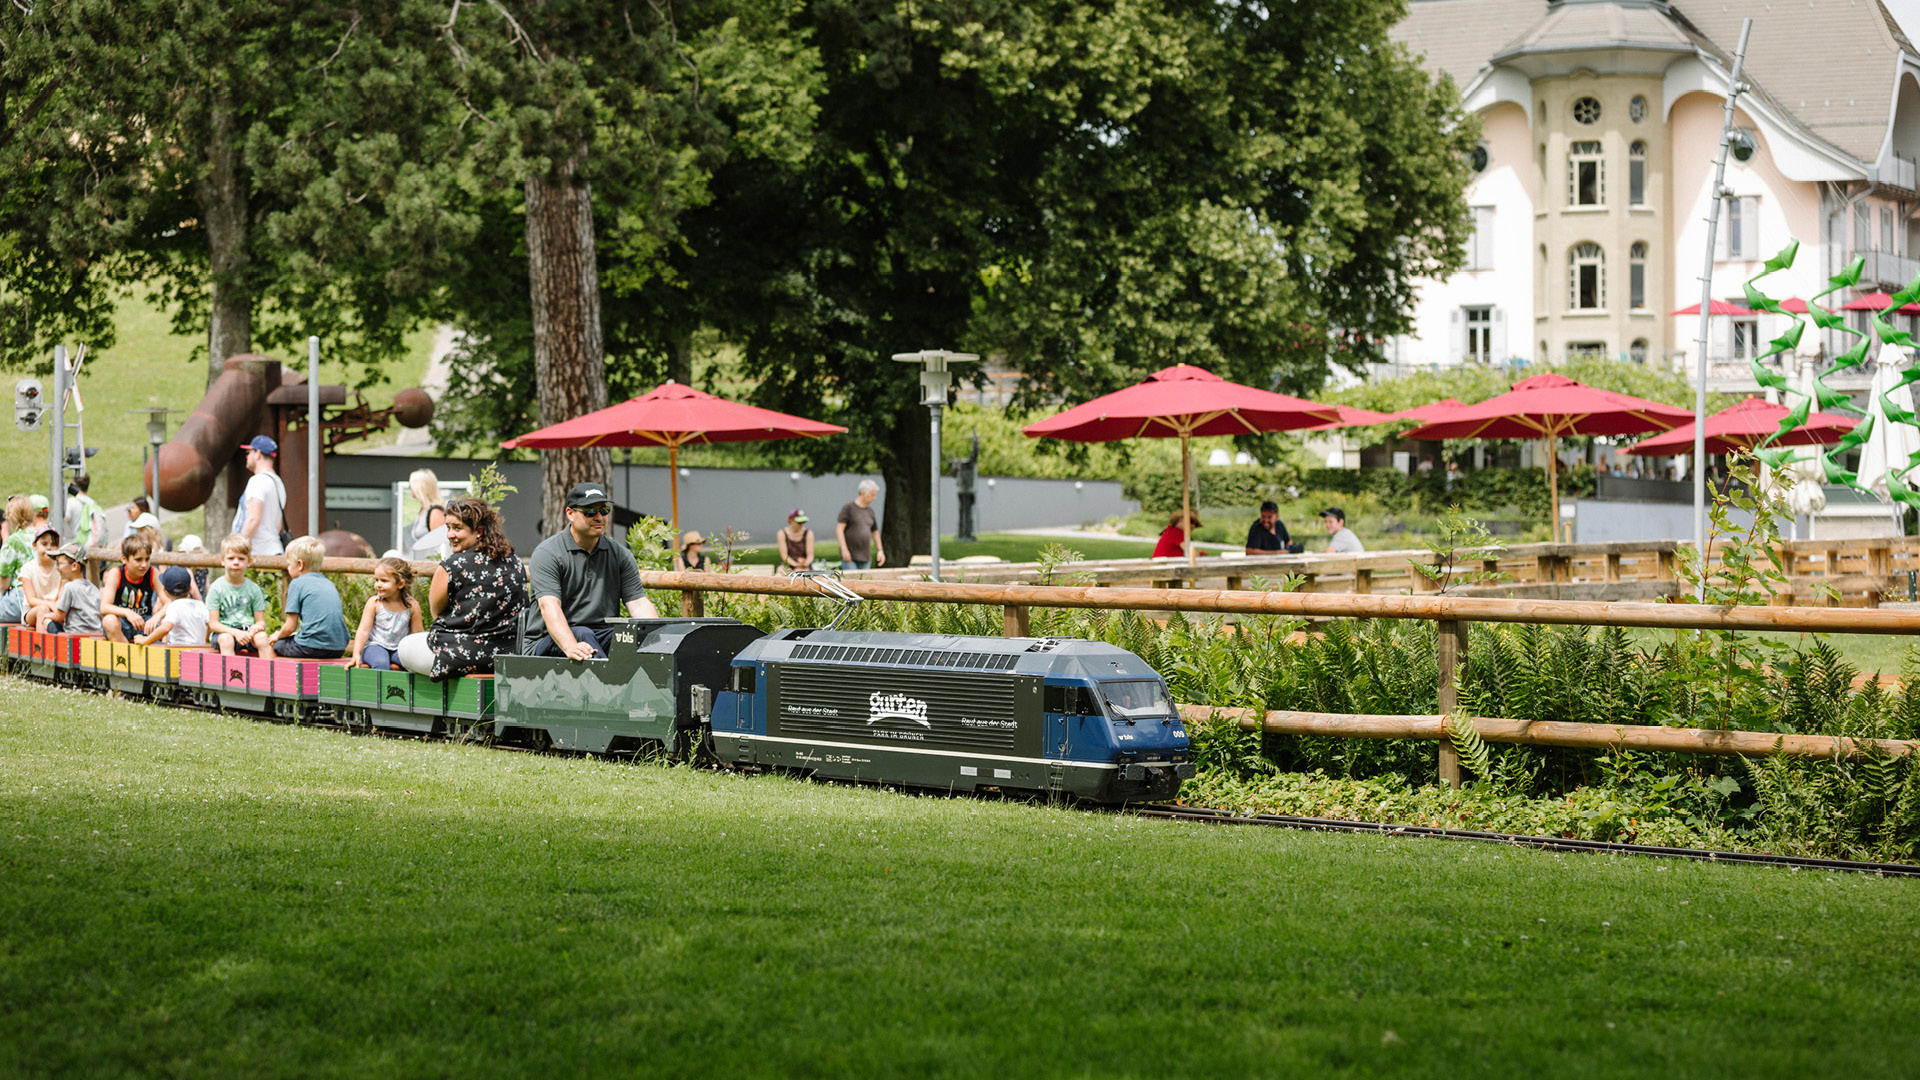 The miniature railway winding its way through the park